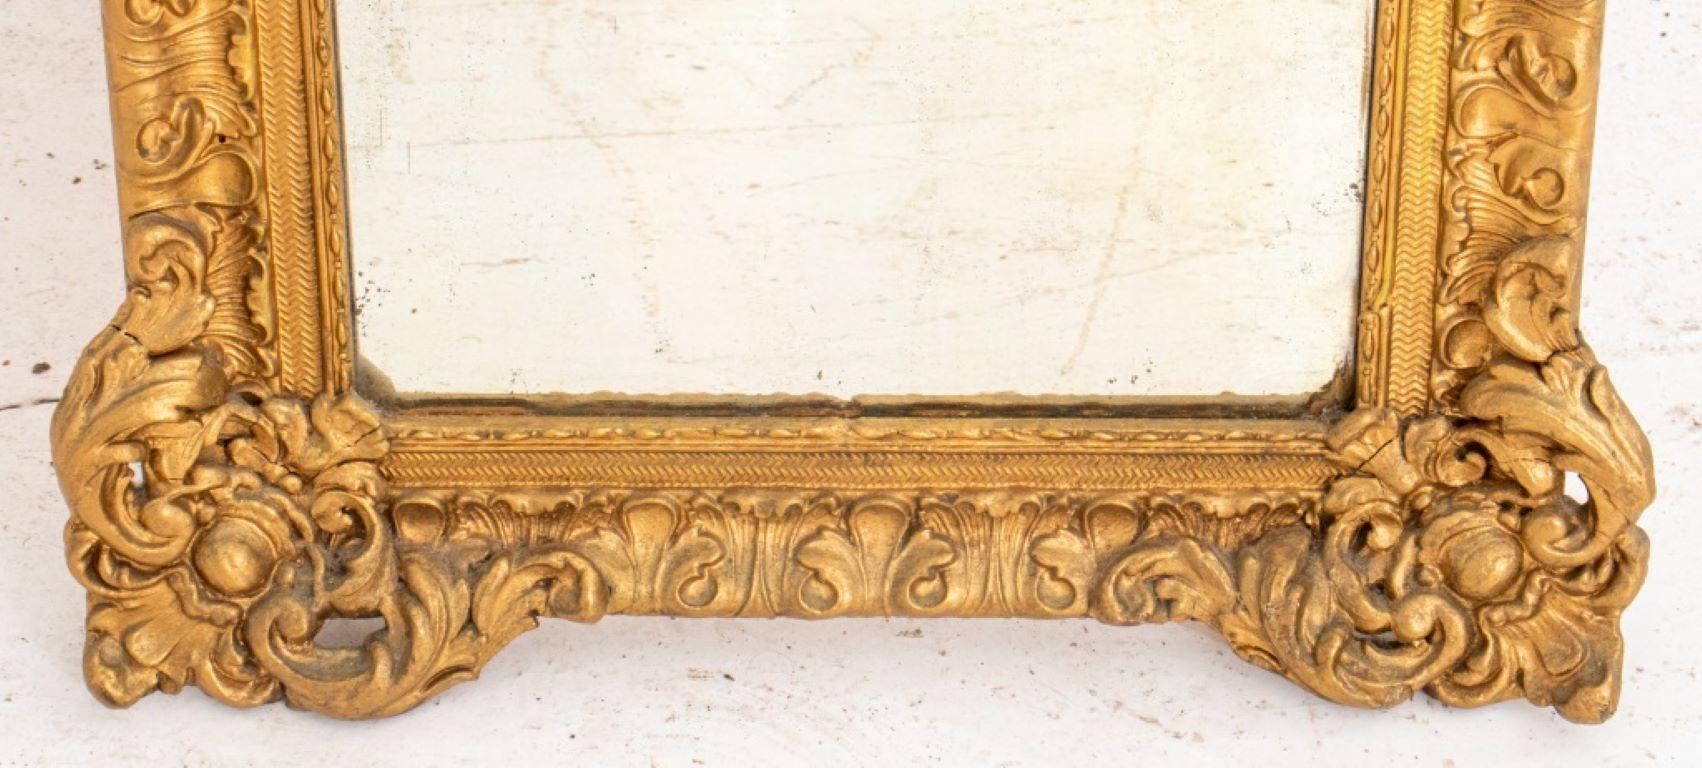 Napoleon III Carved Giltwood Mirror, 19th C. For Sale 2